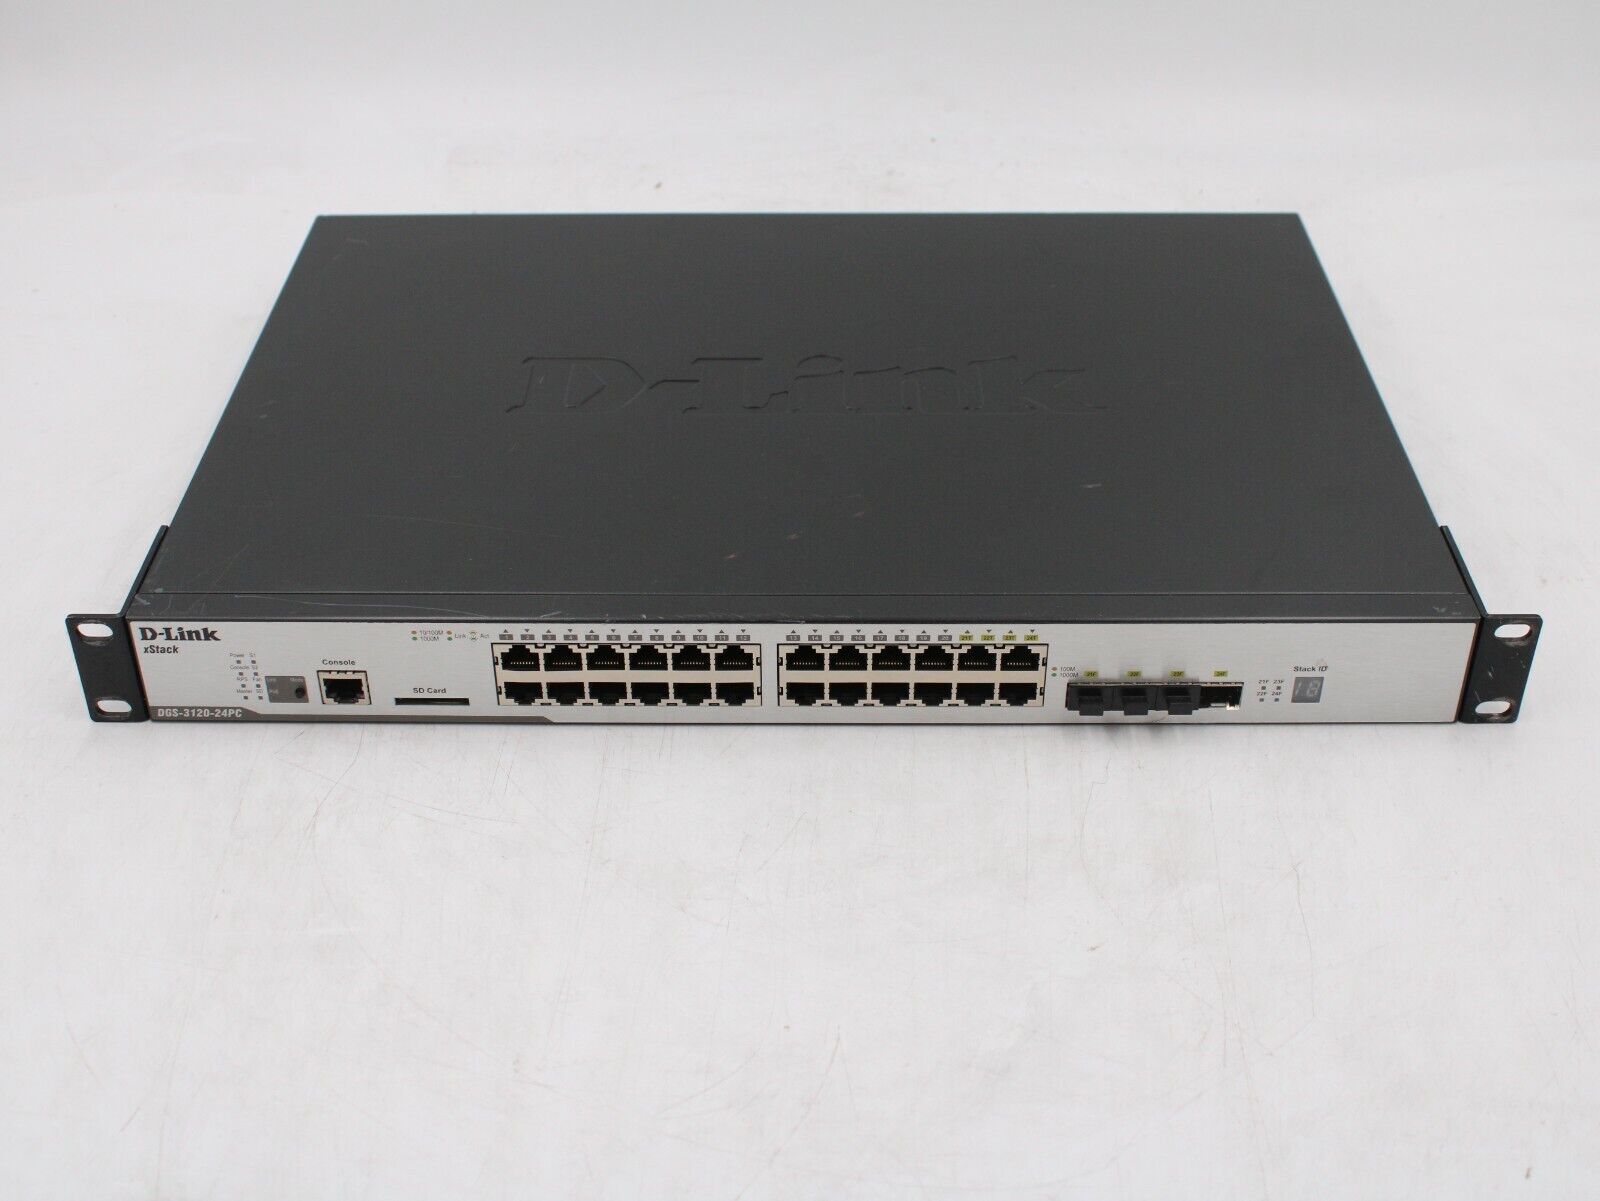 D-Link DGS-3120-24PC 24-Port PoE Managed Network Switch TESTED